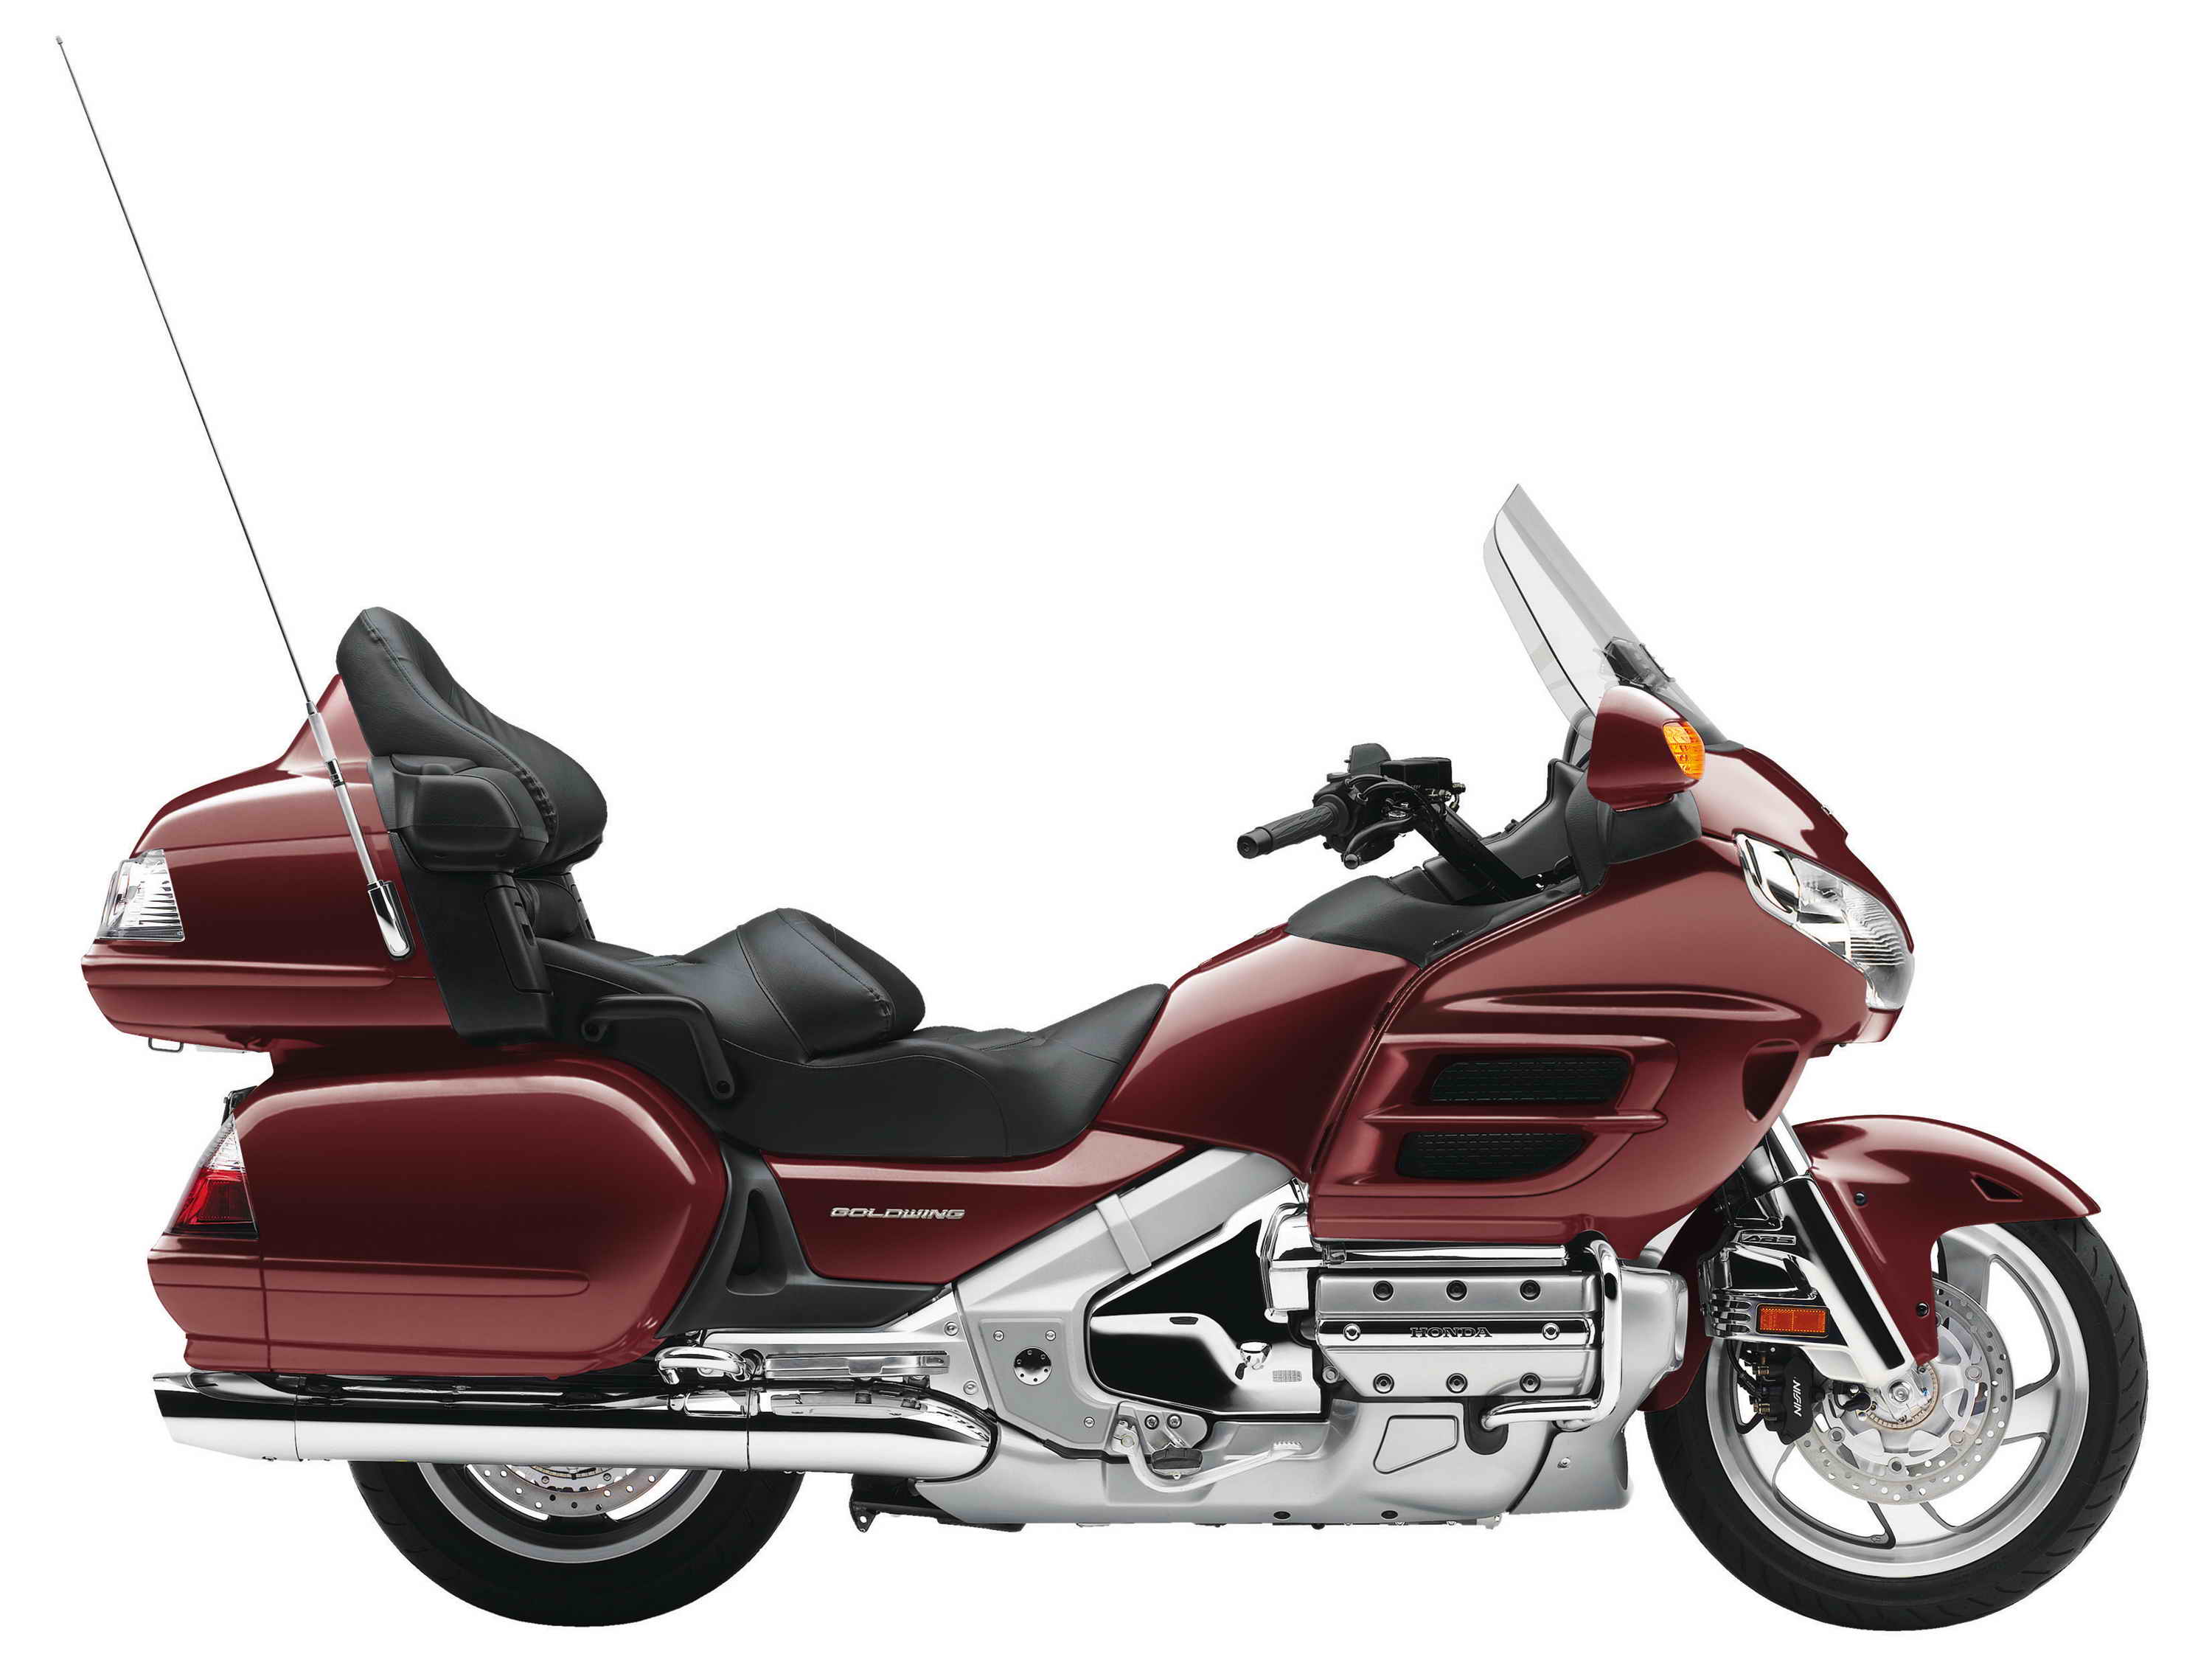 Honda Gold Wing Picture, Photo, Wallpaper